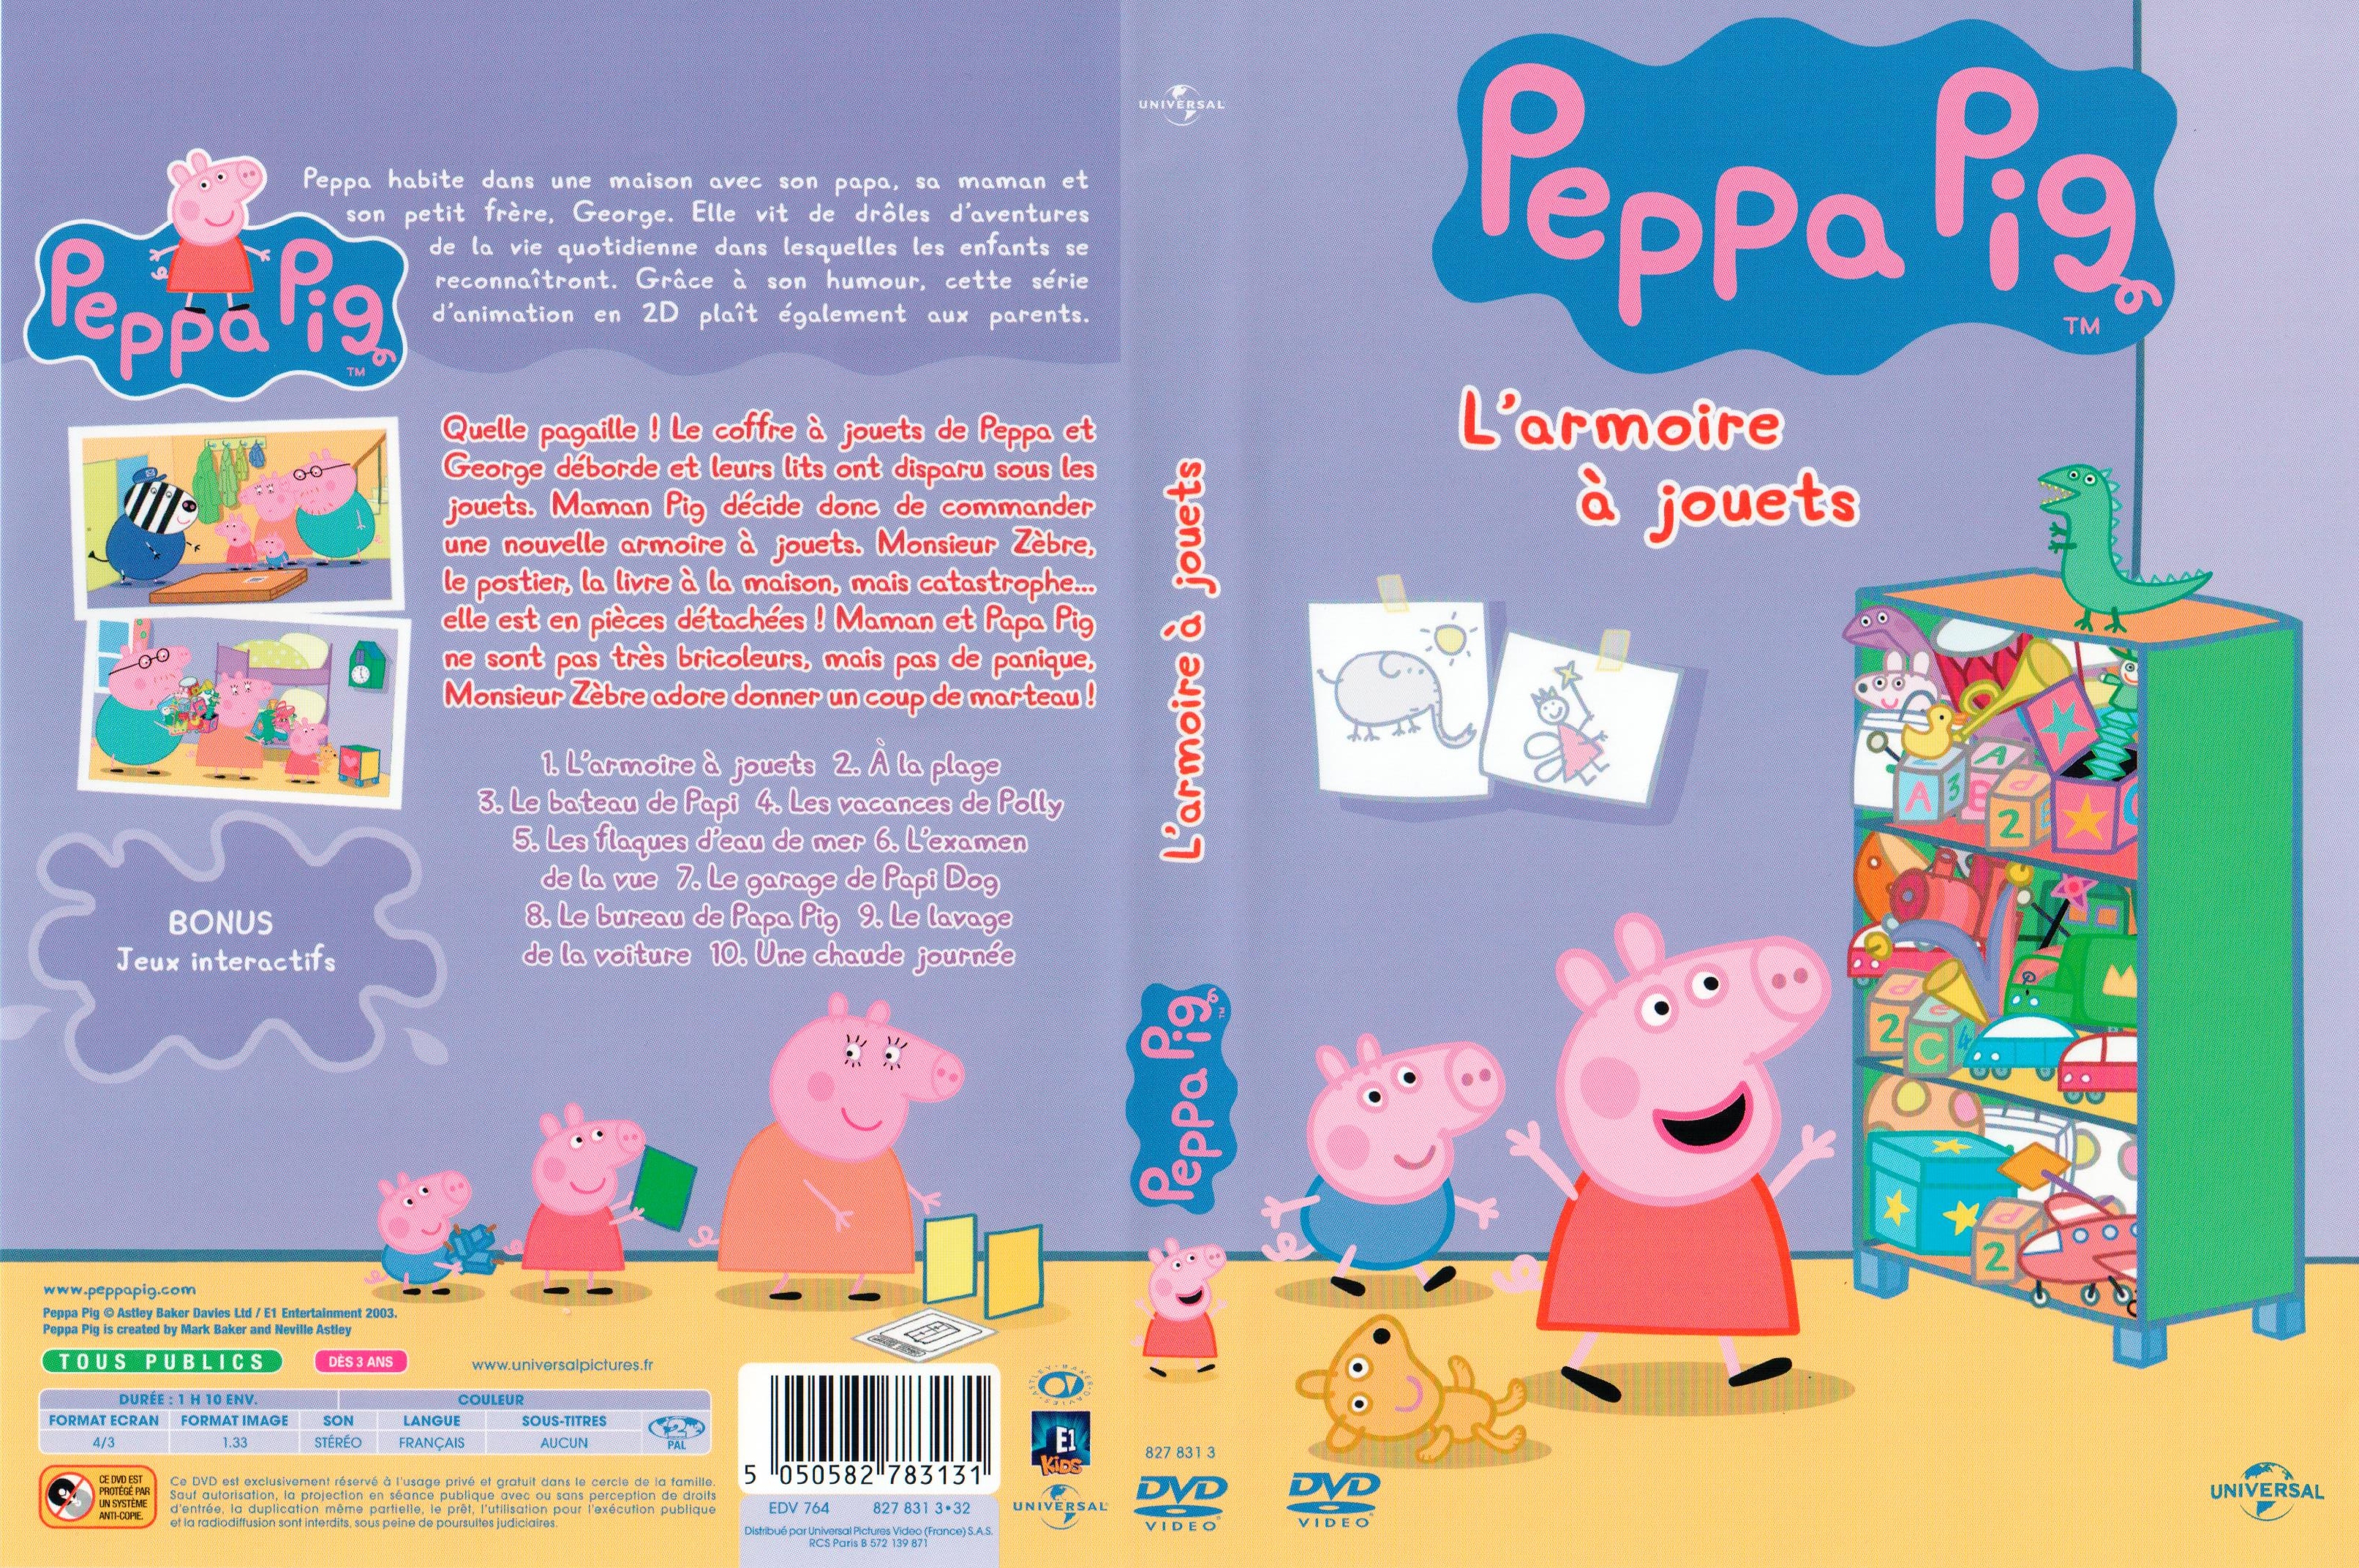 Jaquette DVD Peppa Pig - Armoire a jouets